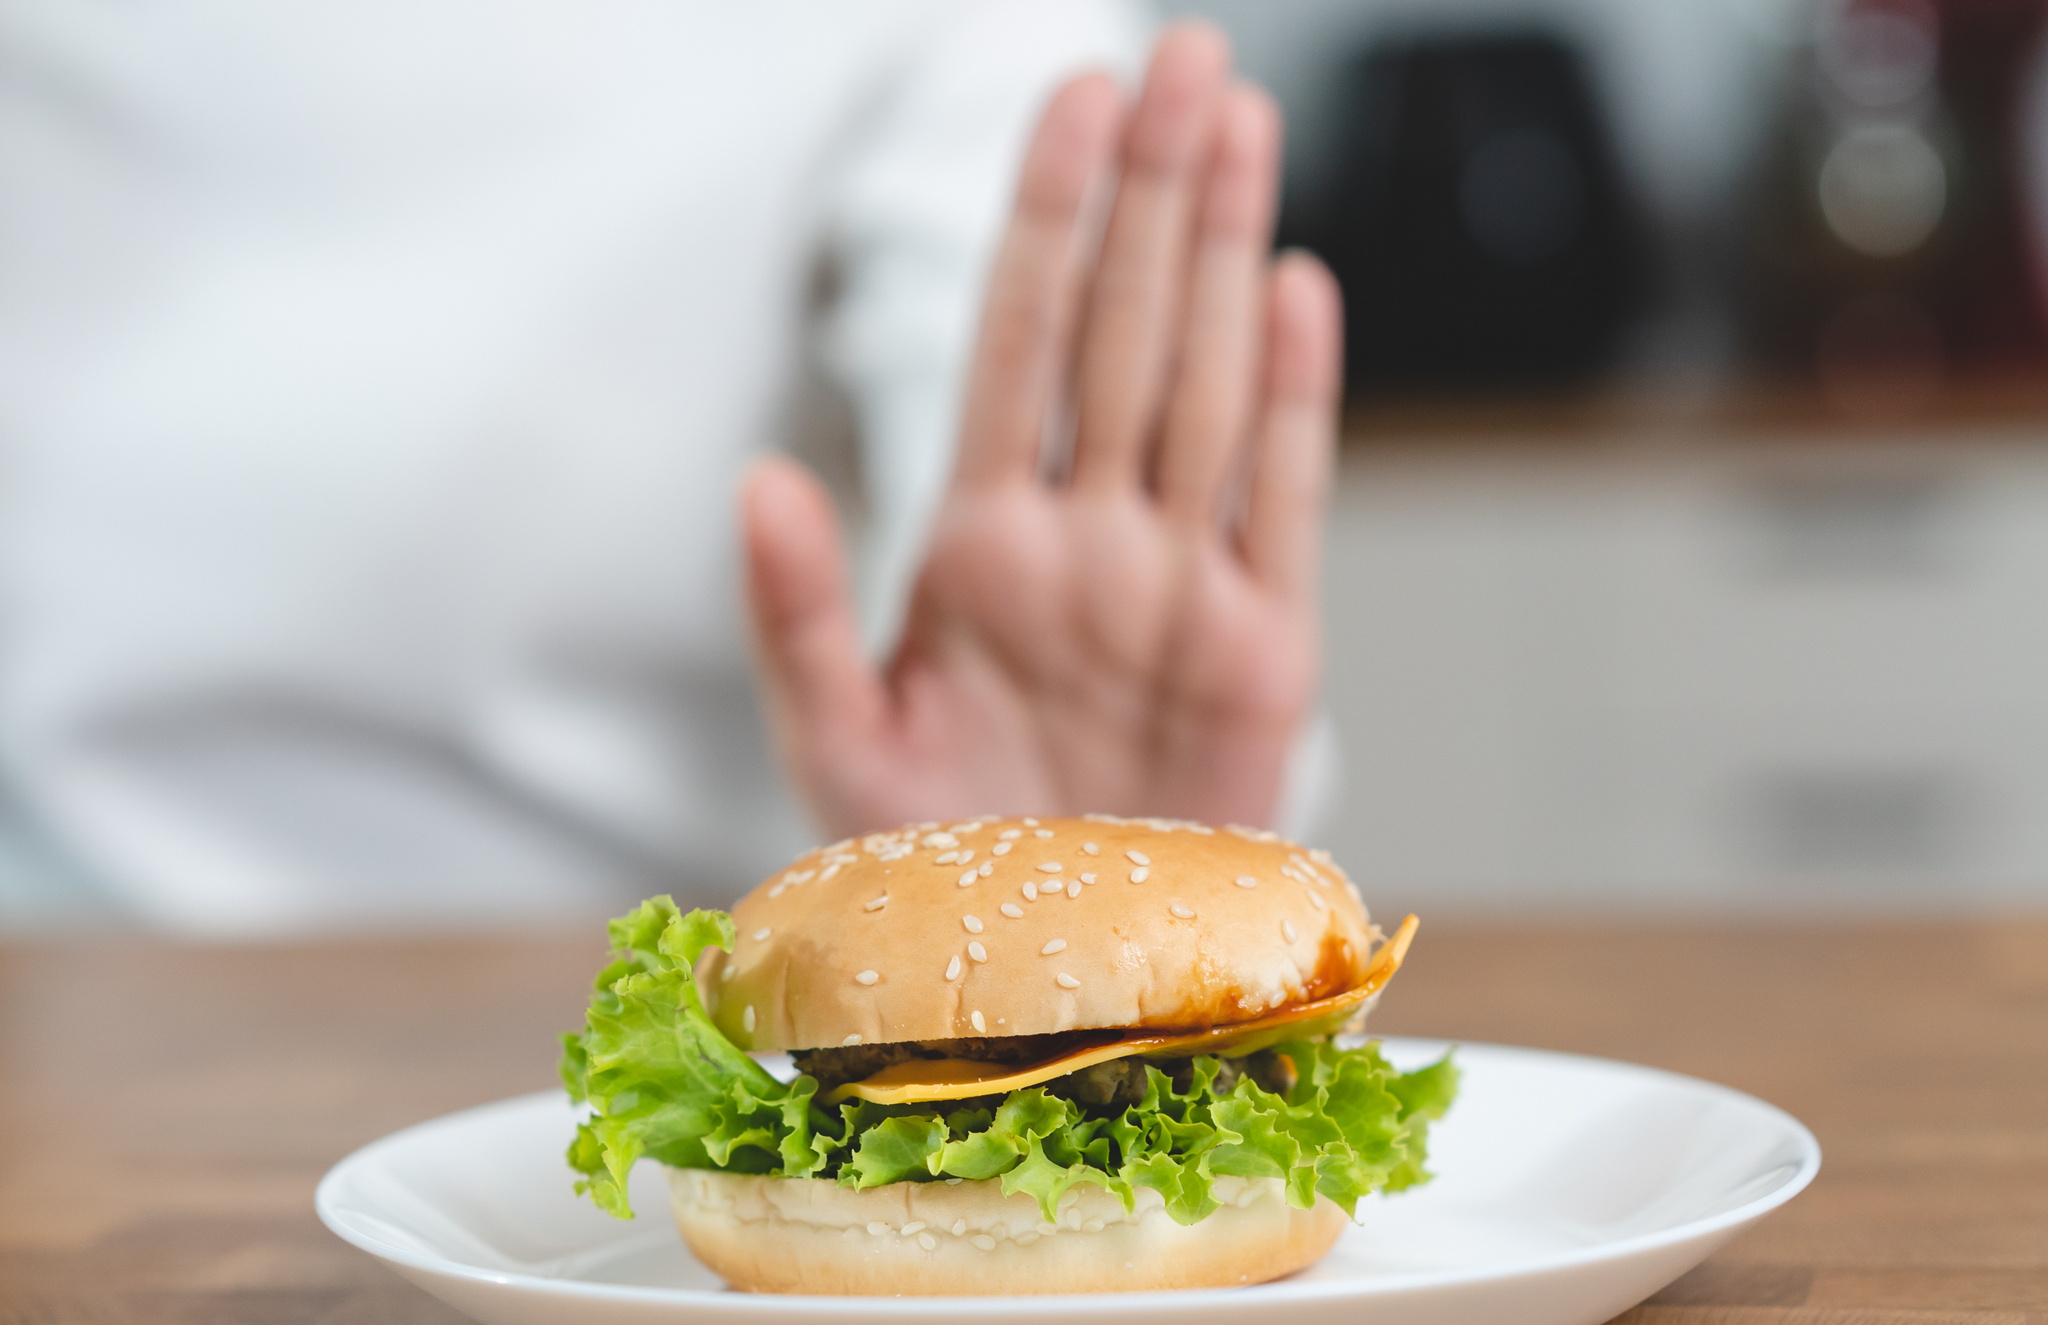 palm of hand indicating stop with a burger